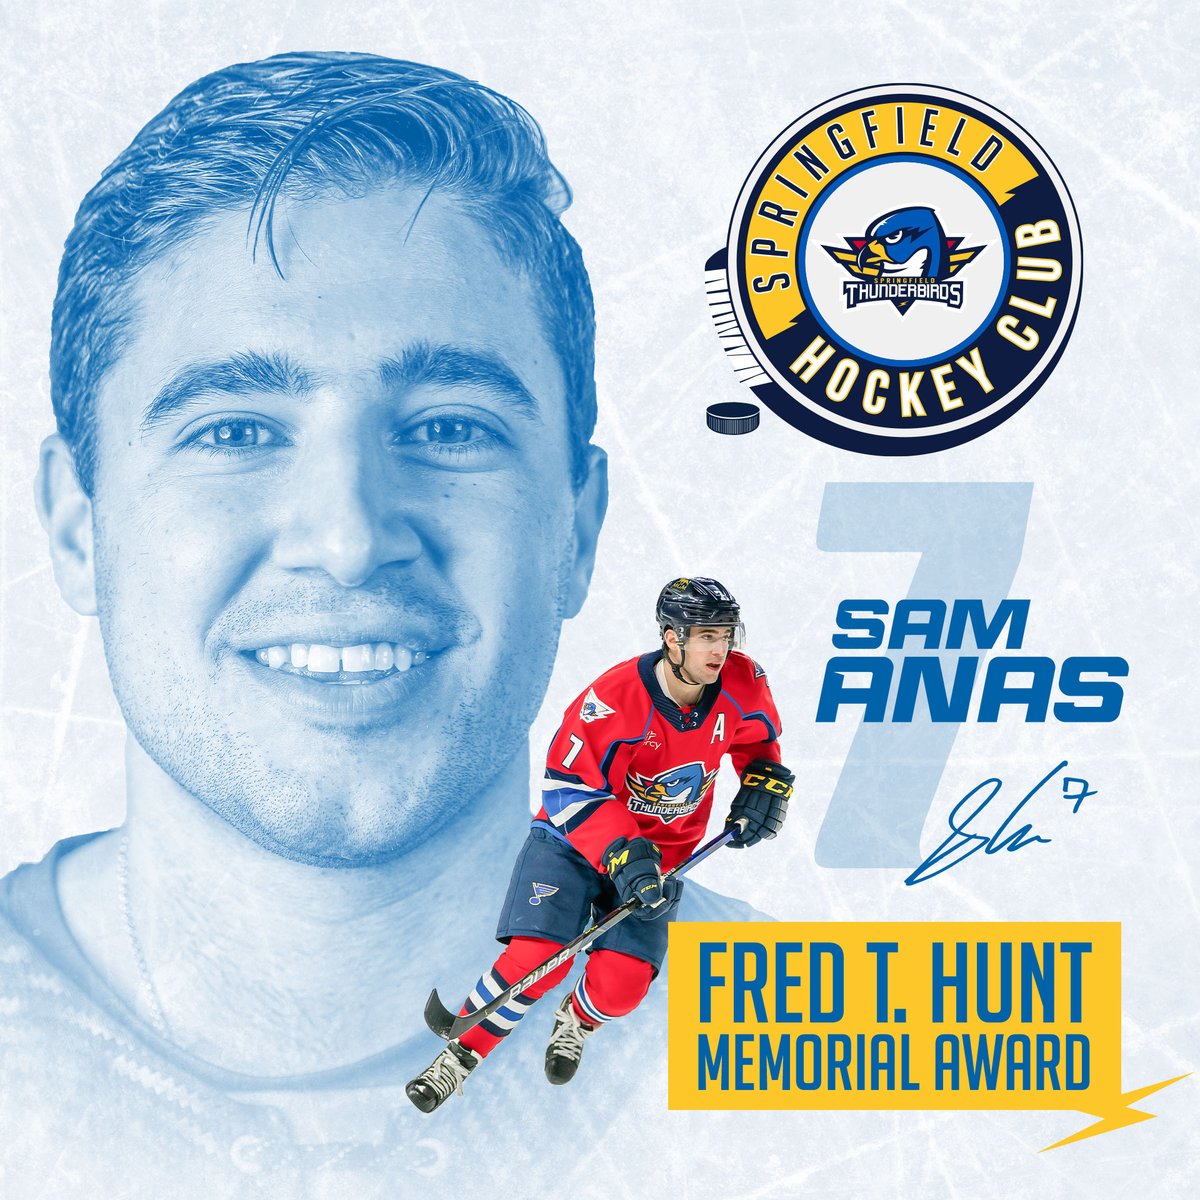 Sam Anas has been named the 2021-22 winner of the Fred T. Hunt Memorial Award! The Fred T. Hunt Memorial Award is awarded to an AHL player who best exemplifies the qualities of sportsmanship, determination, and dedication to hockey.